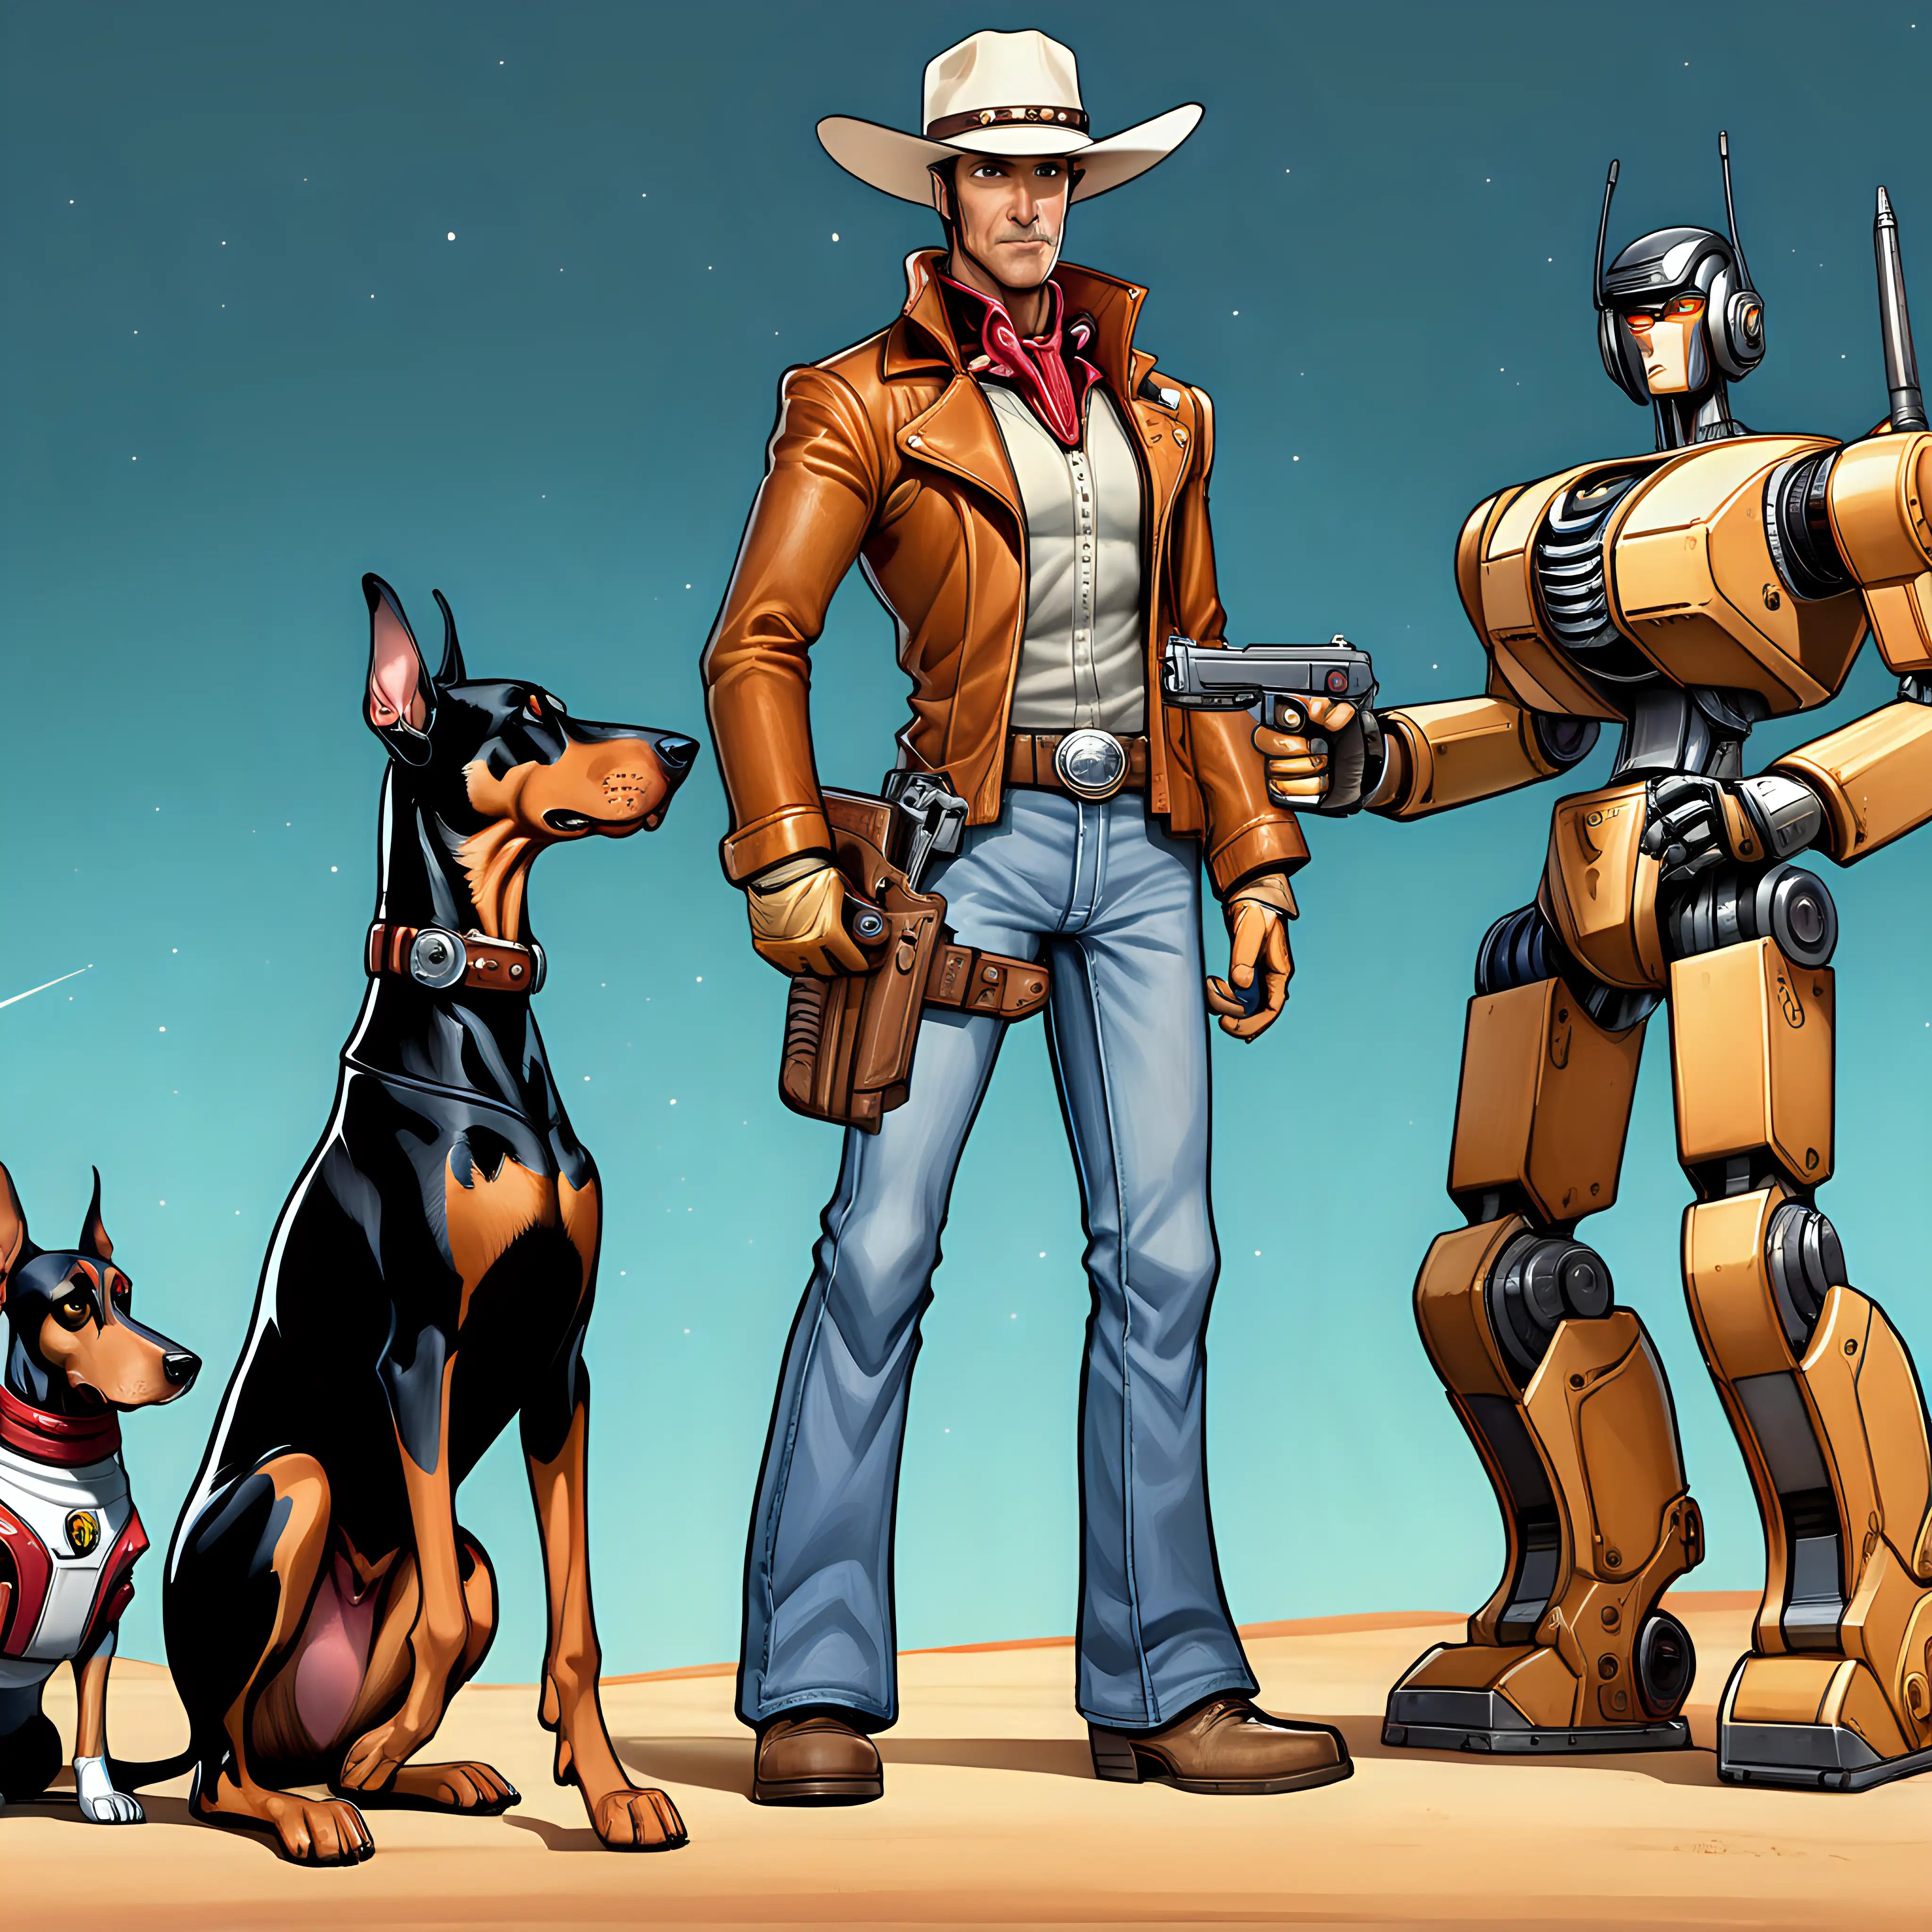 space cowboy with hat and no beard standing next to human robot both caring six shooters with doberman pincher with a corevette



